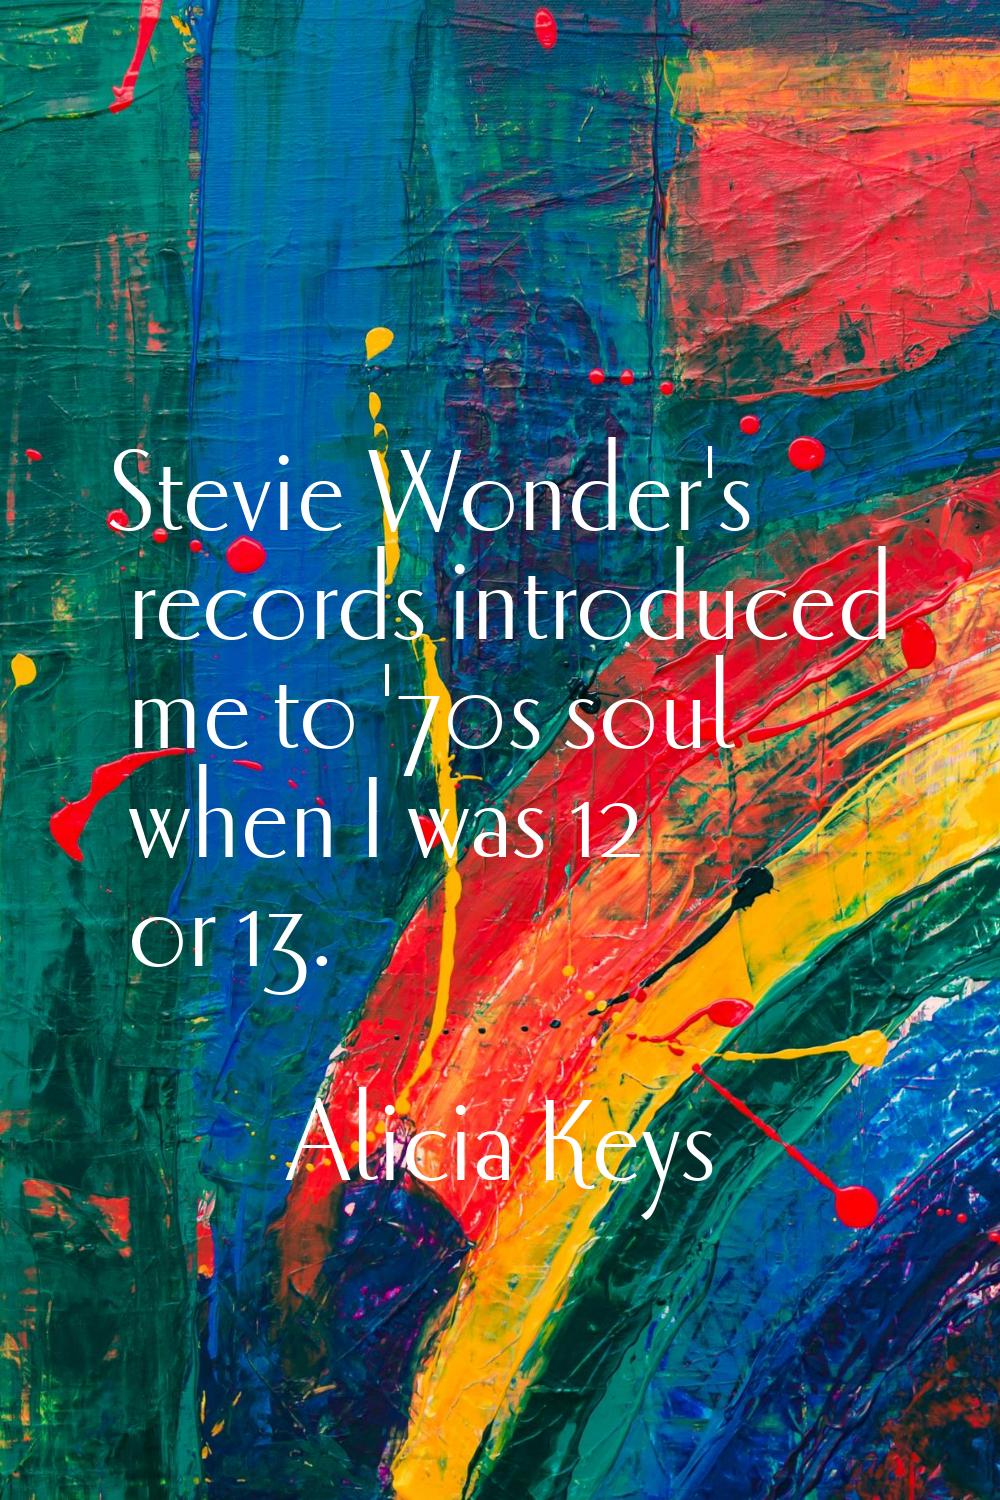 Stevie Wonder's records introduced me to '70s soul when I was 12 or 13.